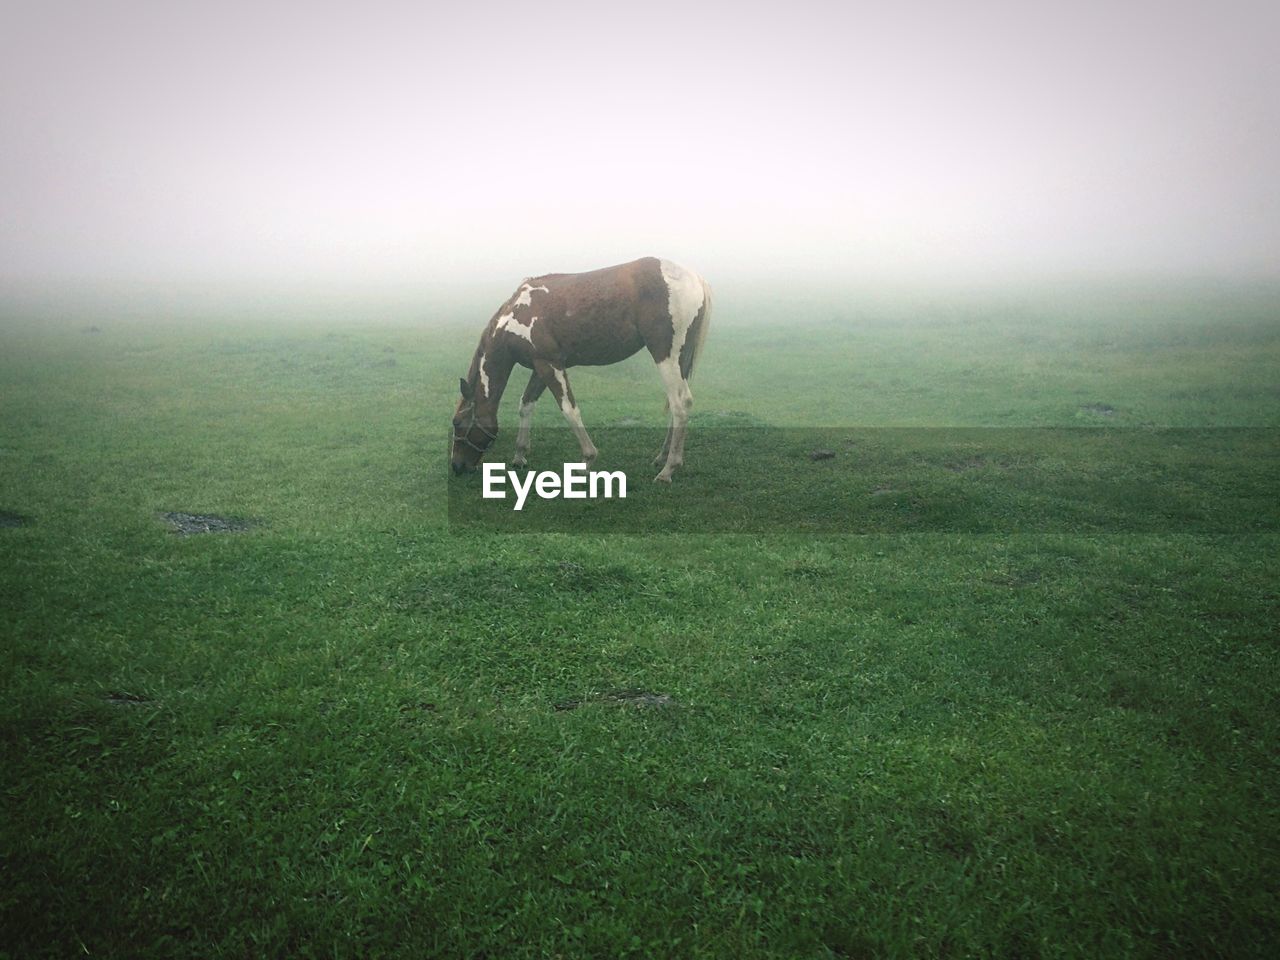 Horse grazing on grassy field during foggy weather